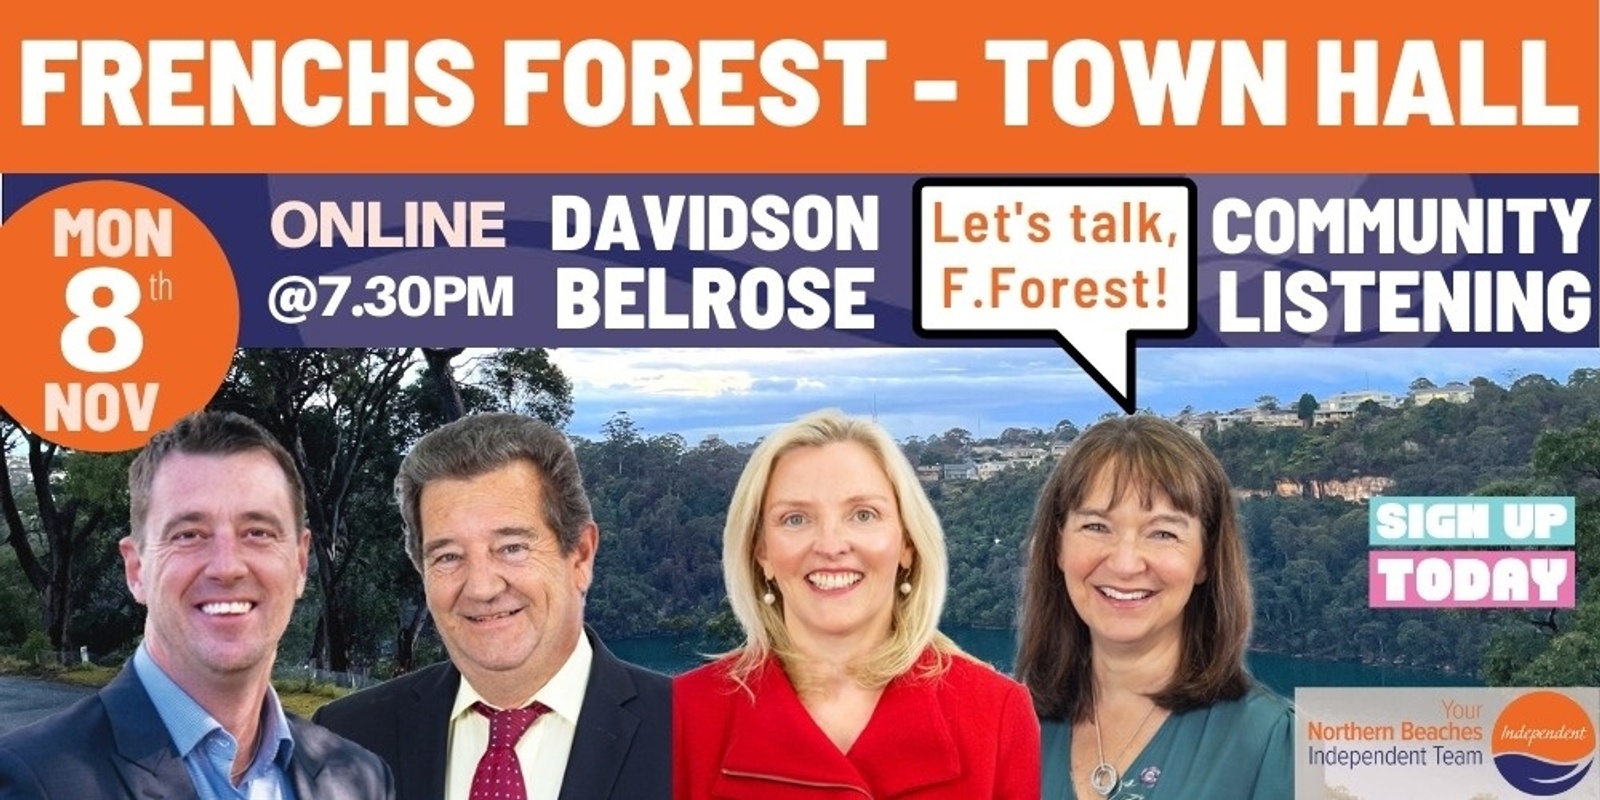 Banner image for Frenchs Forest, Davidson & Belrose - Community Listening Town Hall